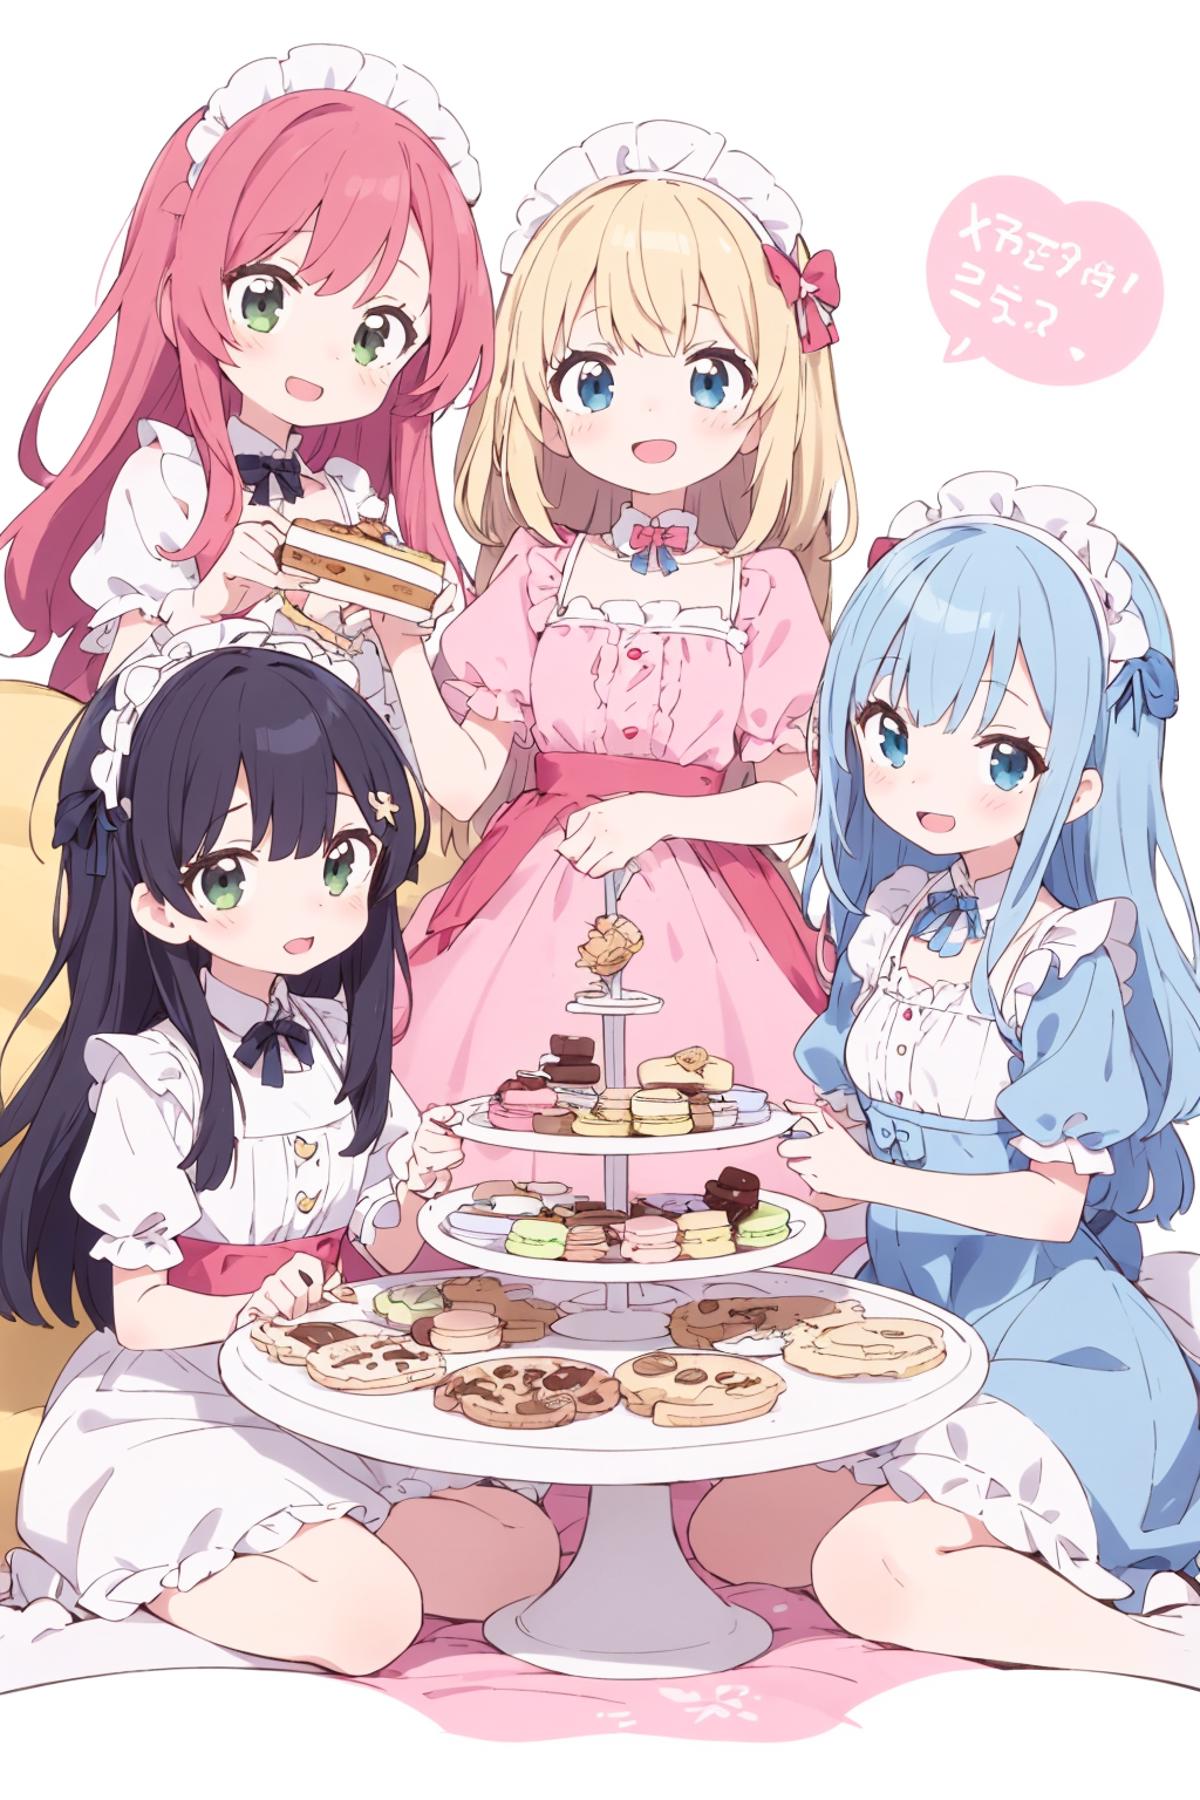 A group of four girls dressed in pink and blue dresses, standing around a table filled with various types of cookies.